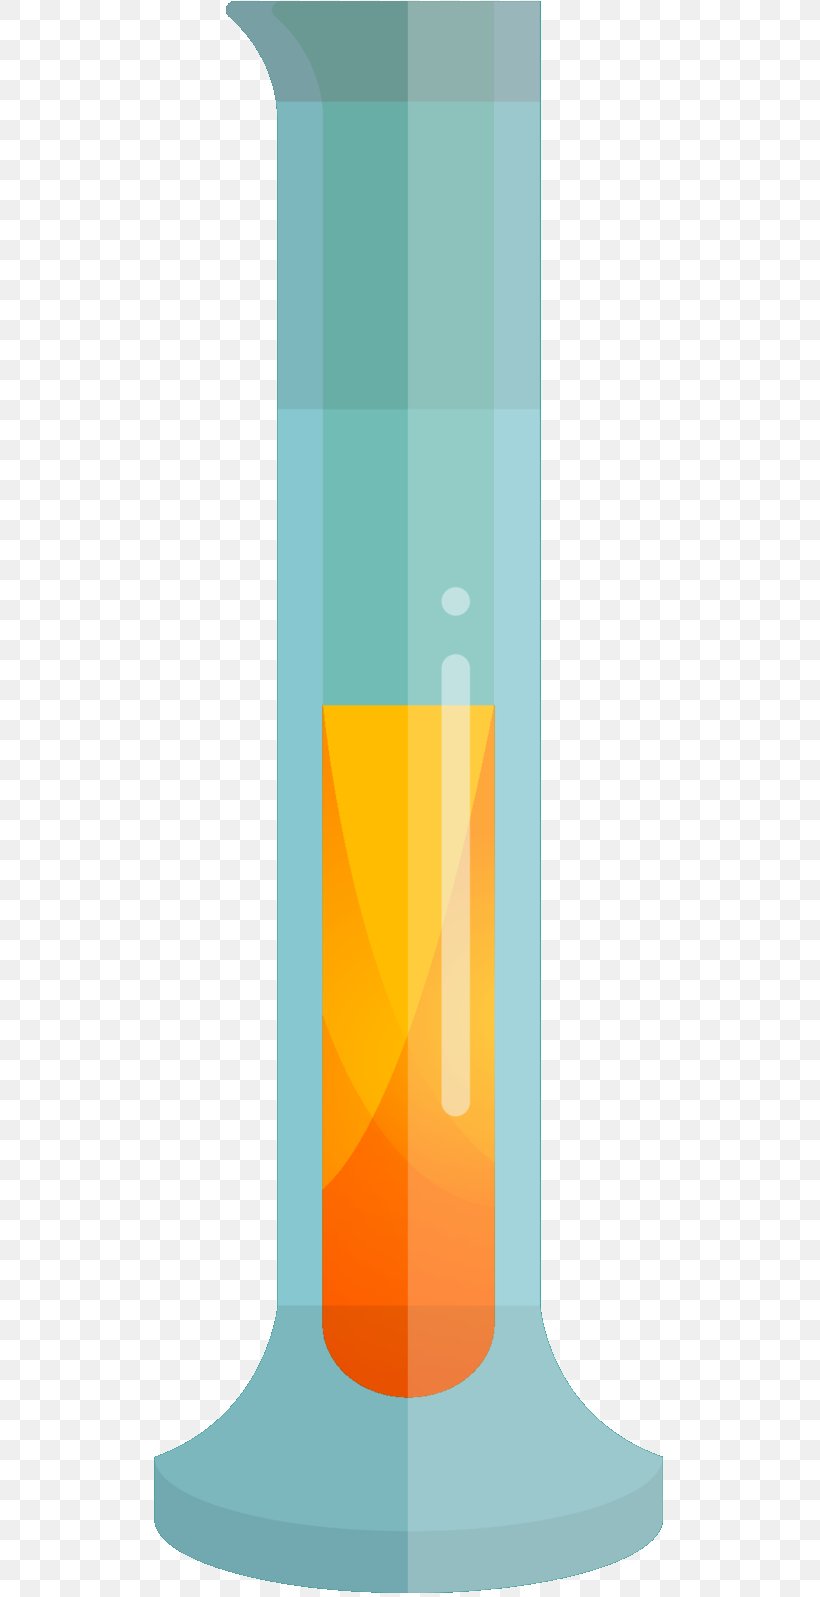 Product Design Angle Cylinder Font, PNG, 524x1597px, Cylinder, Material Property, Orange, Rectangle, Turquoise Download Free